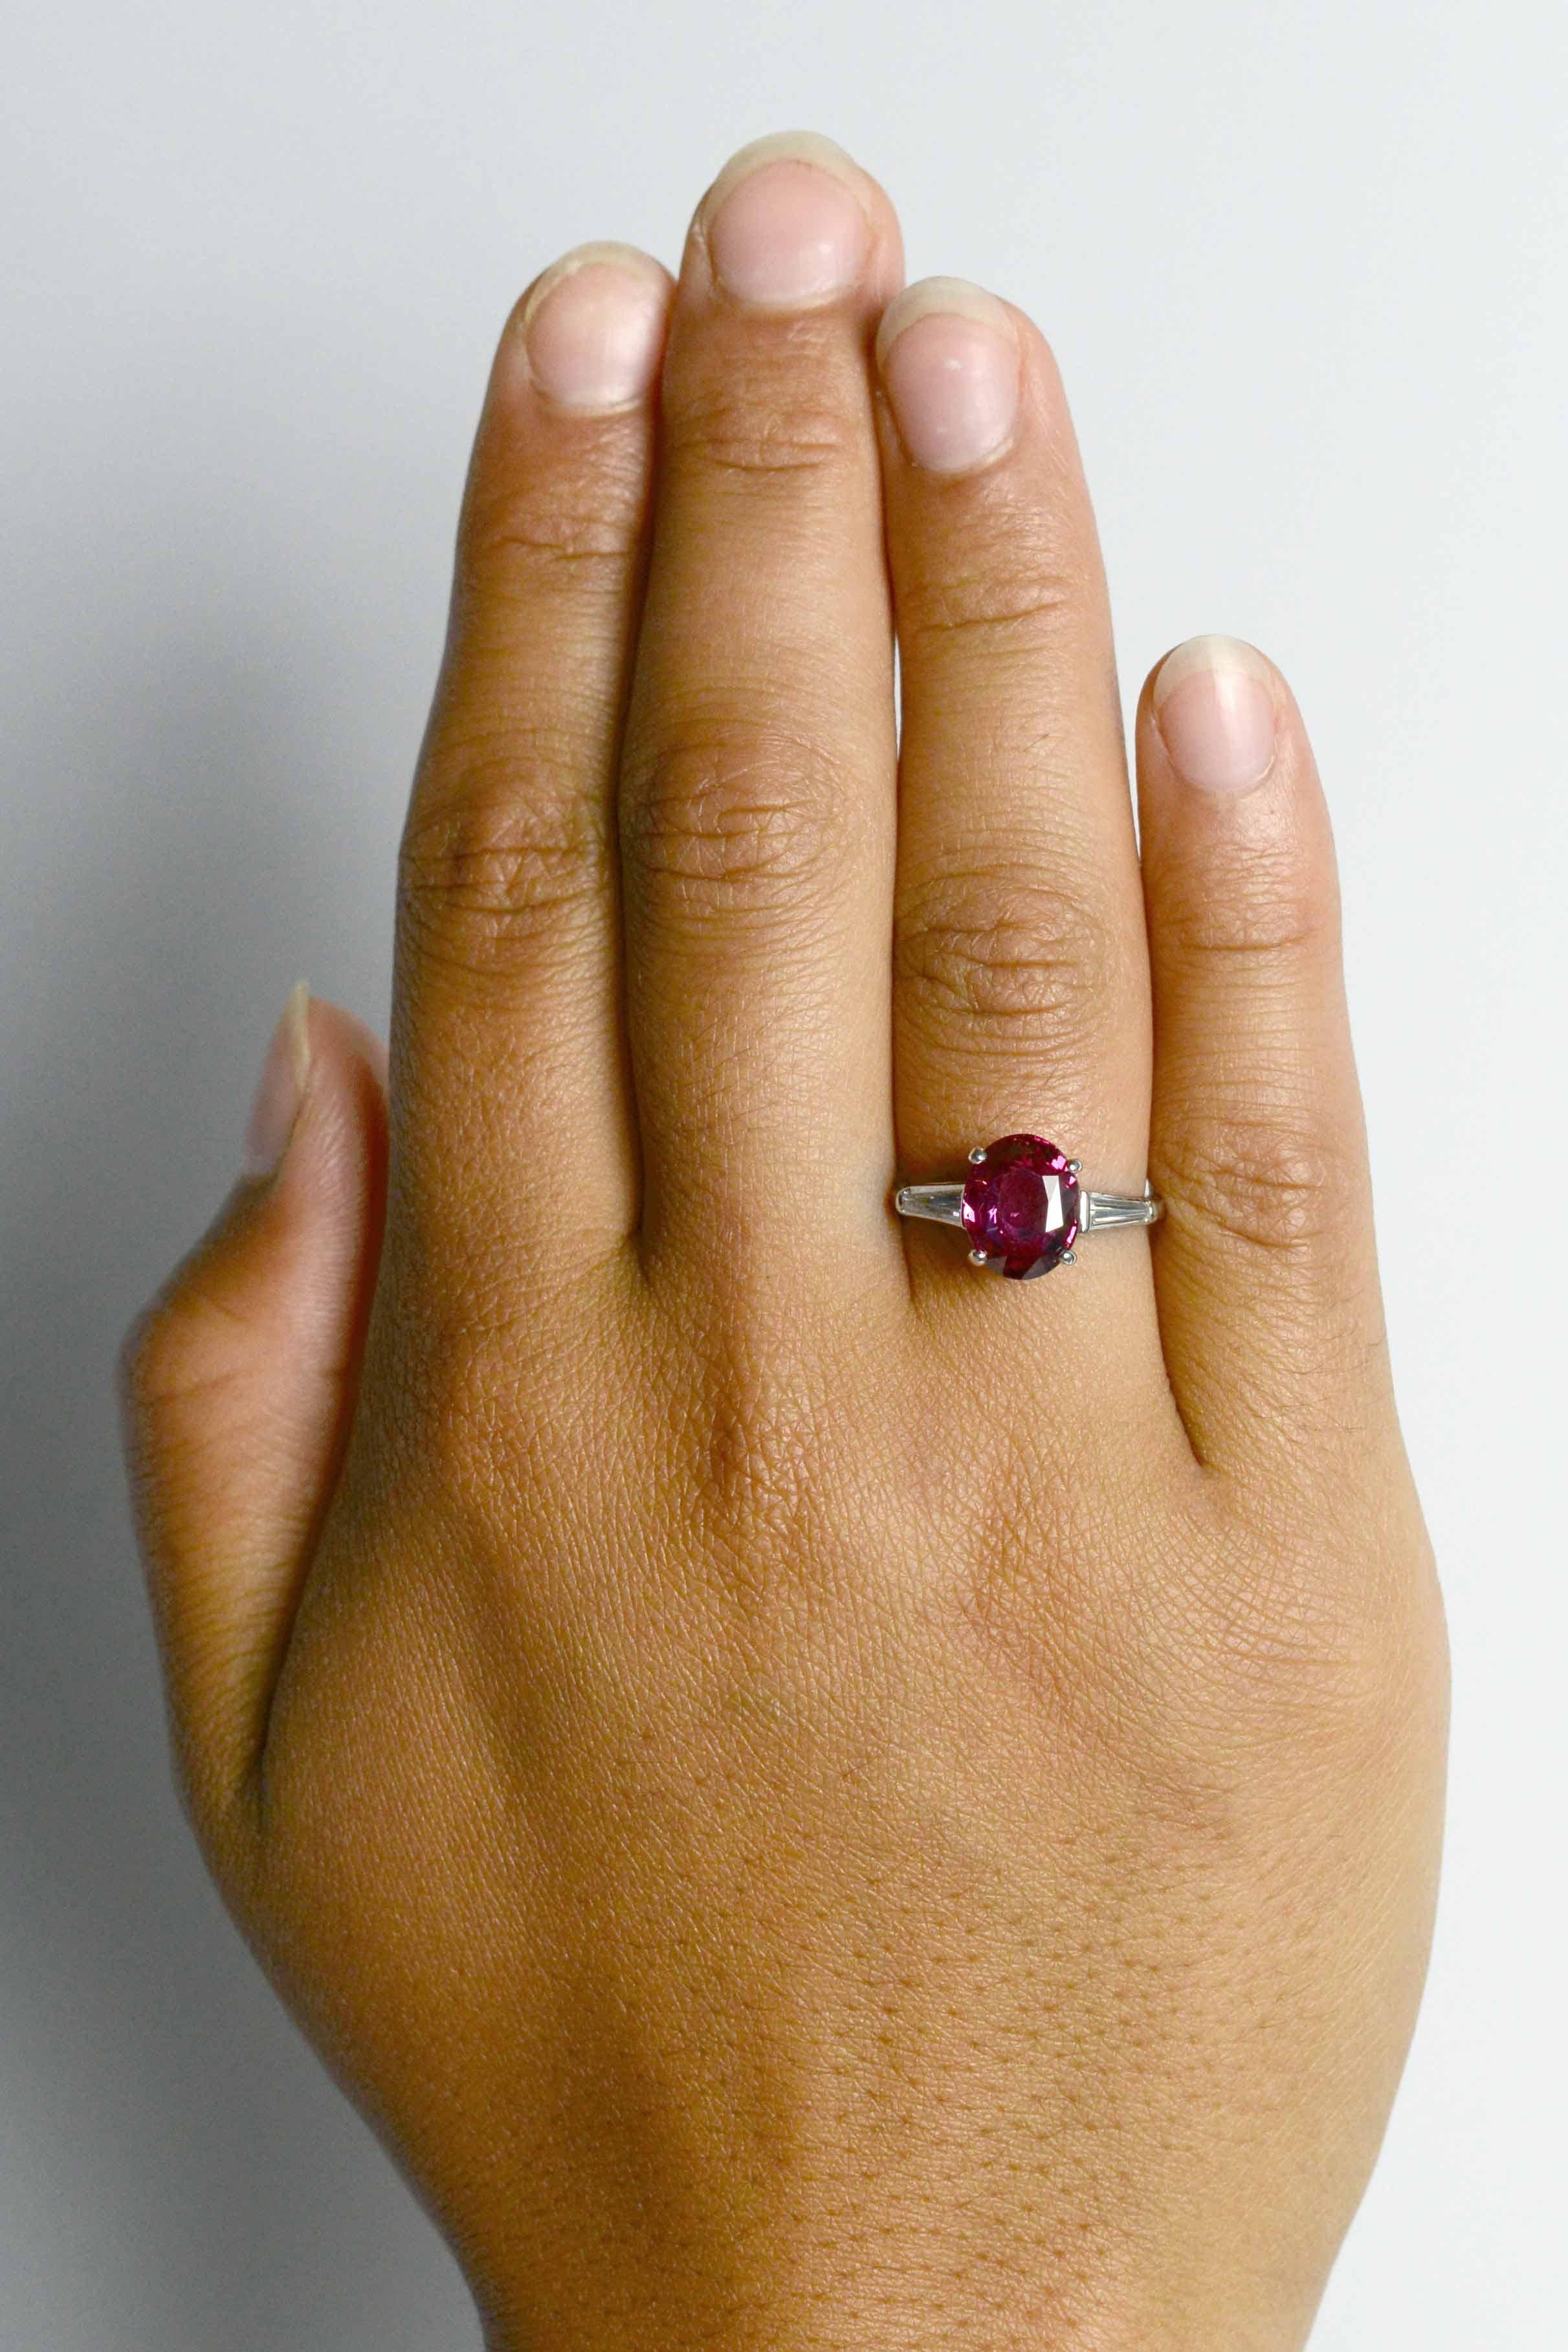 This regal ruby engagement ring boasts a GIA certified 3.95 carat natural ruby of a deeply saturated red. So tantalizing, with a captivating hue and shimmering luster, the oval solitaire complimented by diamond baguette shoulders completed by a